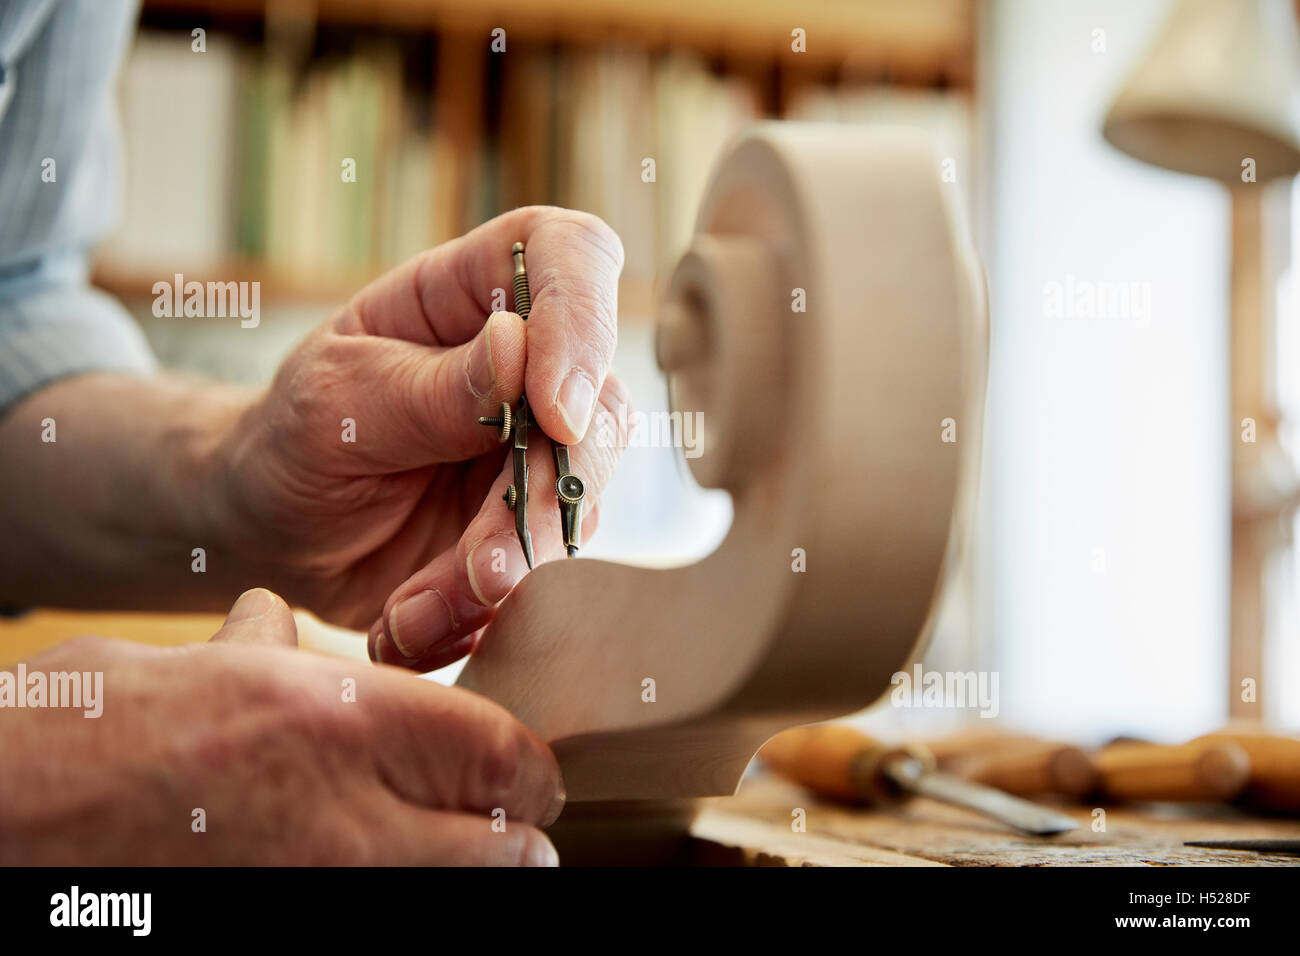 A violin maker working in his workshop, using hand tools to shape and chisel the curled scroll of the violin stock. Stock Photo